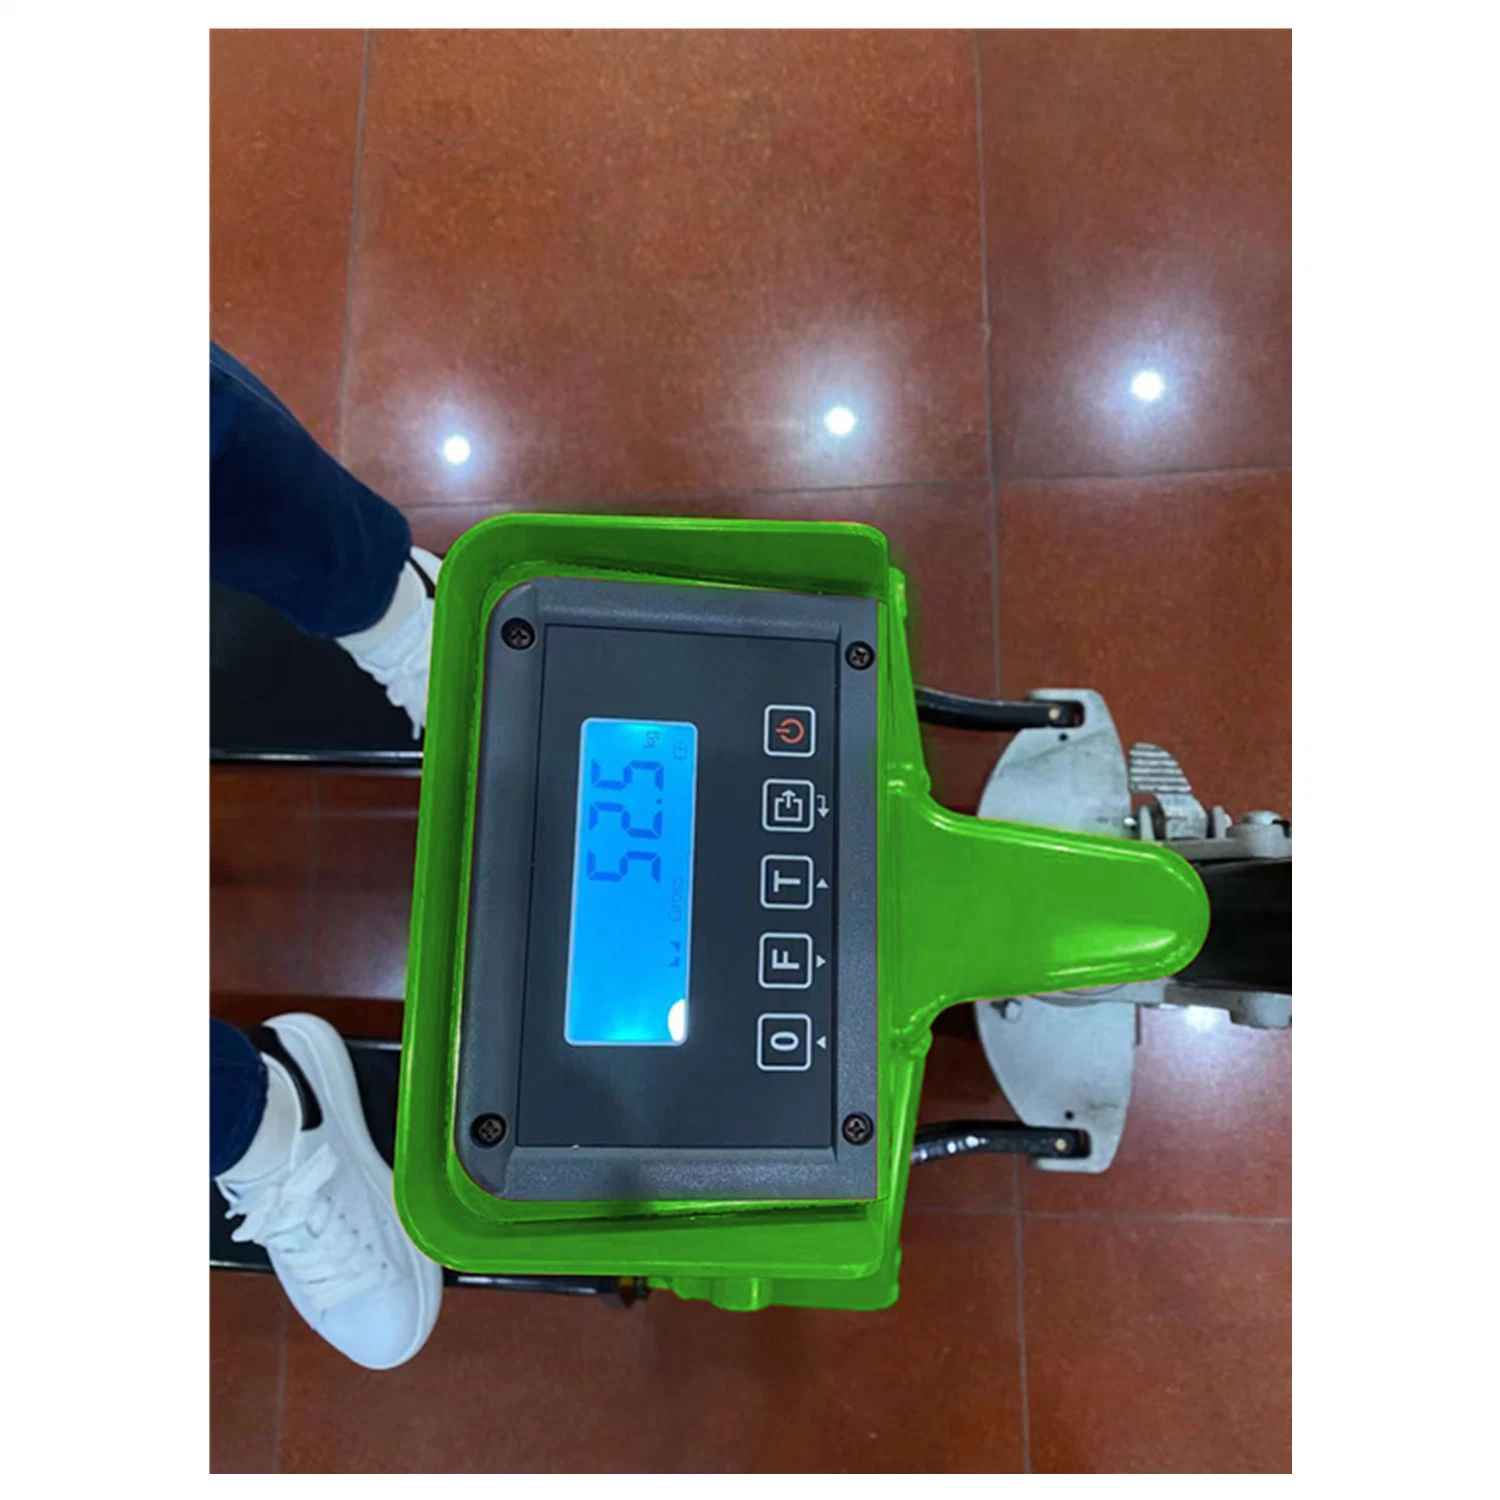 2.5 Ton Cheap Low Profile Hydraulic Hand Pallet Truck Scale Price